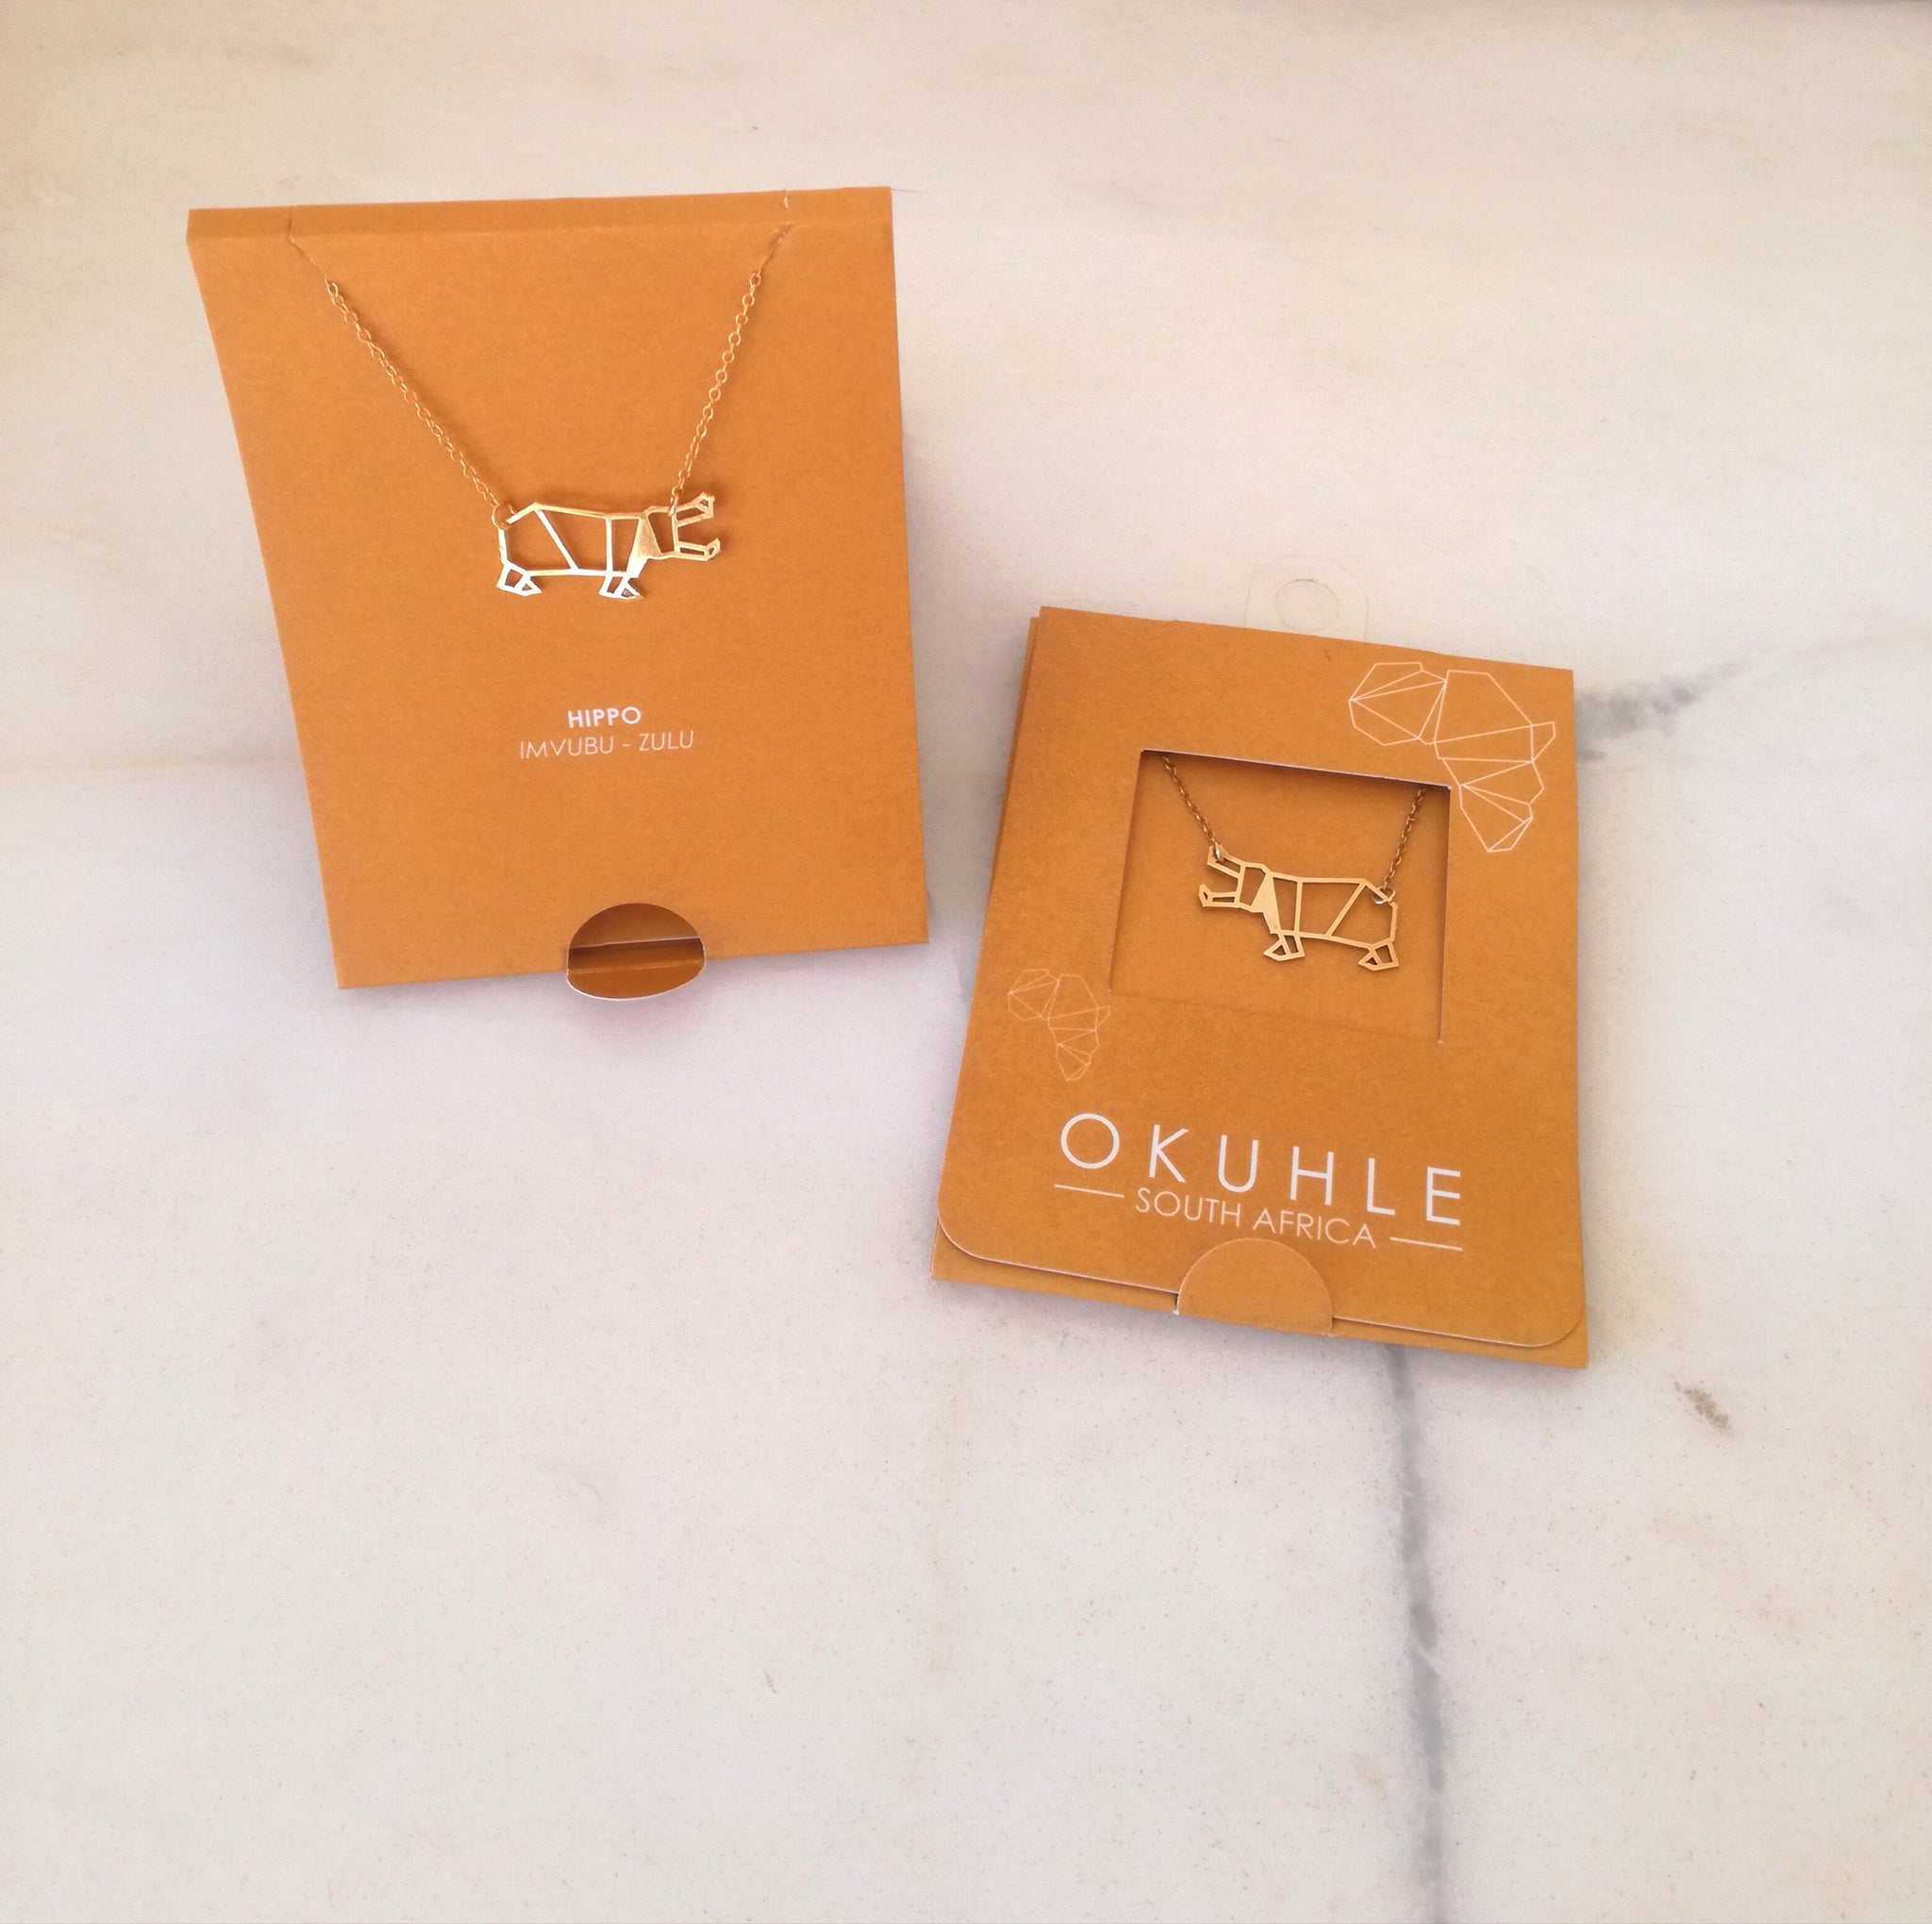 OKUHLE Hippo pendant & necklace - packaging